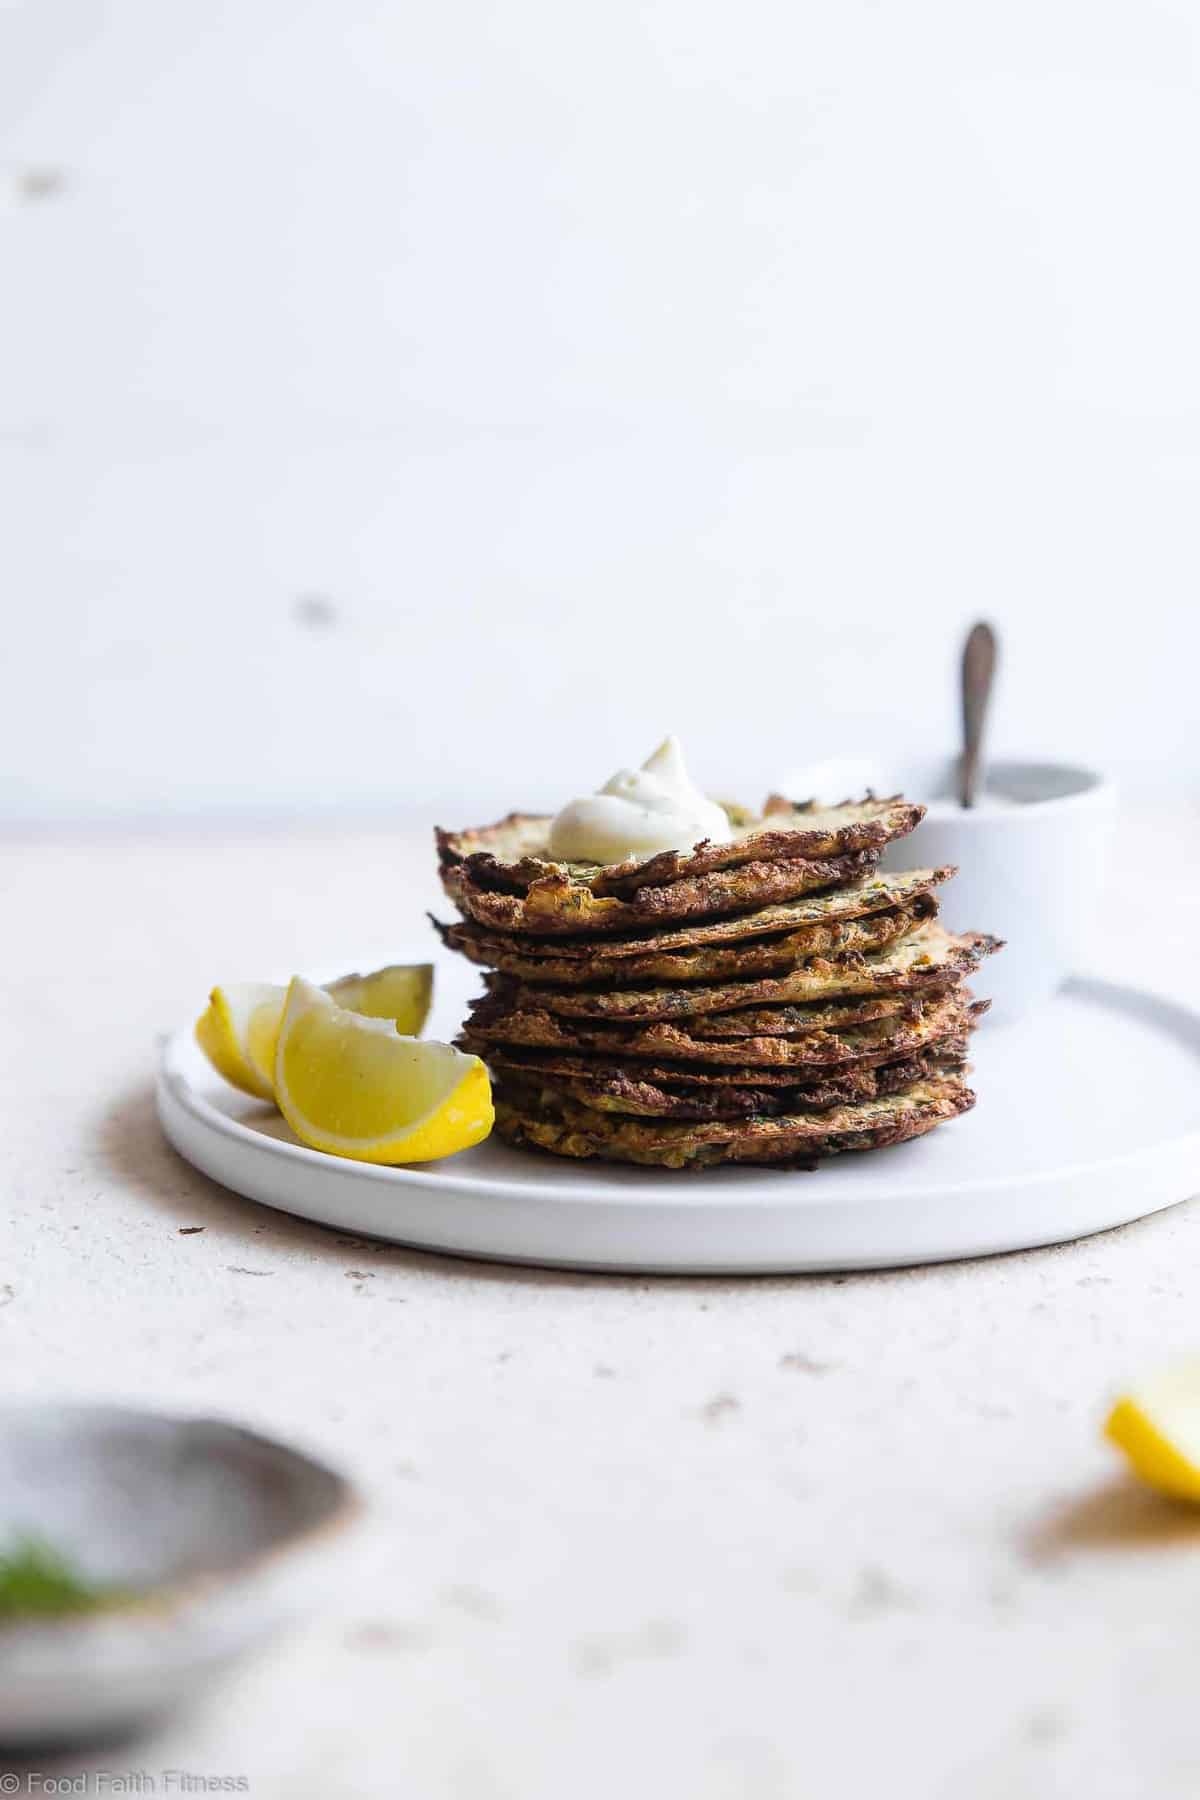 Paleo Baked Zucchini Fritters - These EAS, keto Baked Zucchini Fritters are served with an addicting lemon dill drop and are SO crispy, you'll never believe they're baked not fried! Gluten free, low carb, whole30 and insanely tasty! | #Foodfaithfitness | #Glutenfree #keto #Paleo #Whole30 #Lowcarb